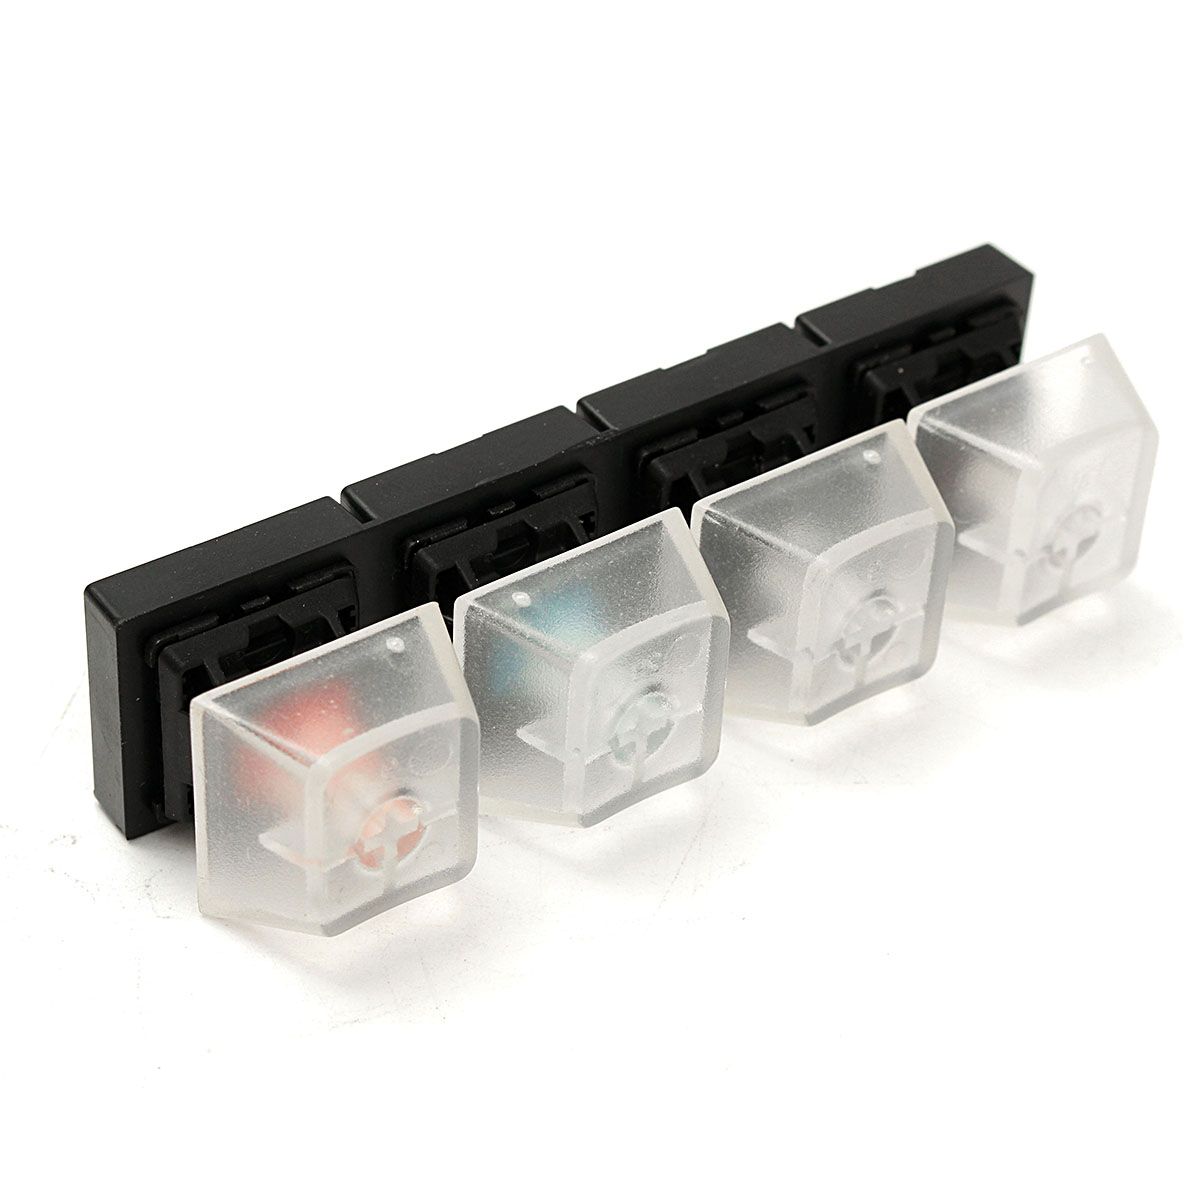 4-Clear-caps-and-4-Cherry-MX-Switch-Keycap-Sampler-Tester-Kit-1078423